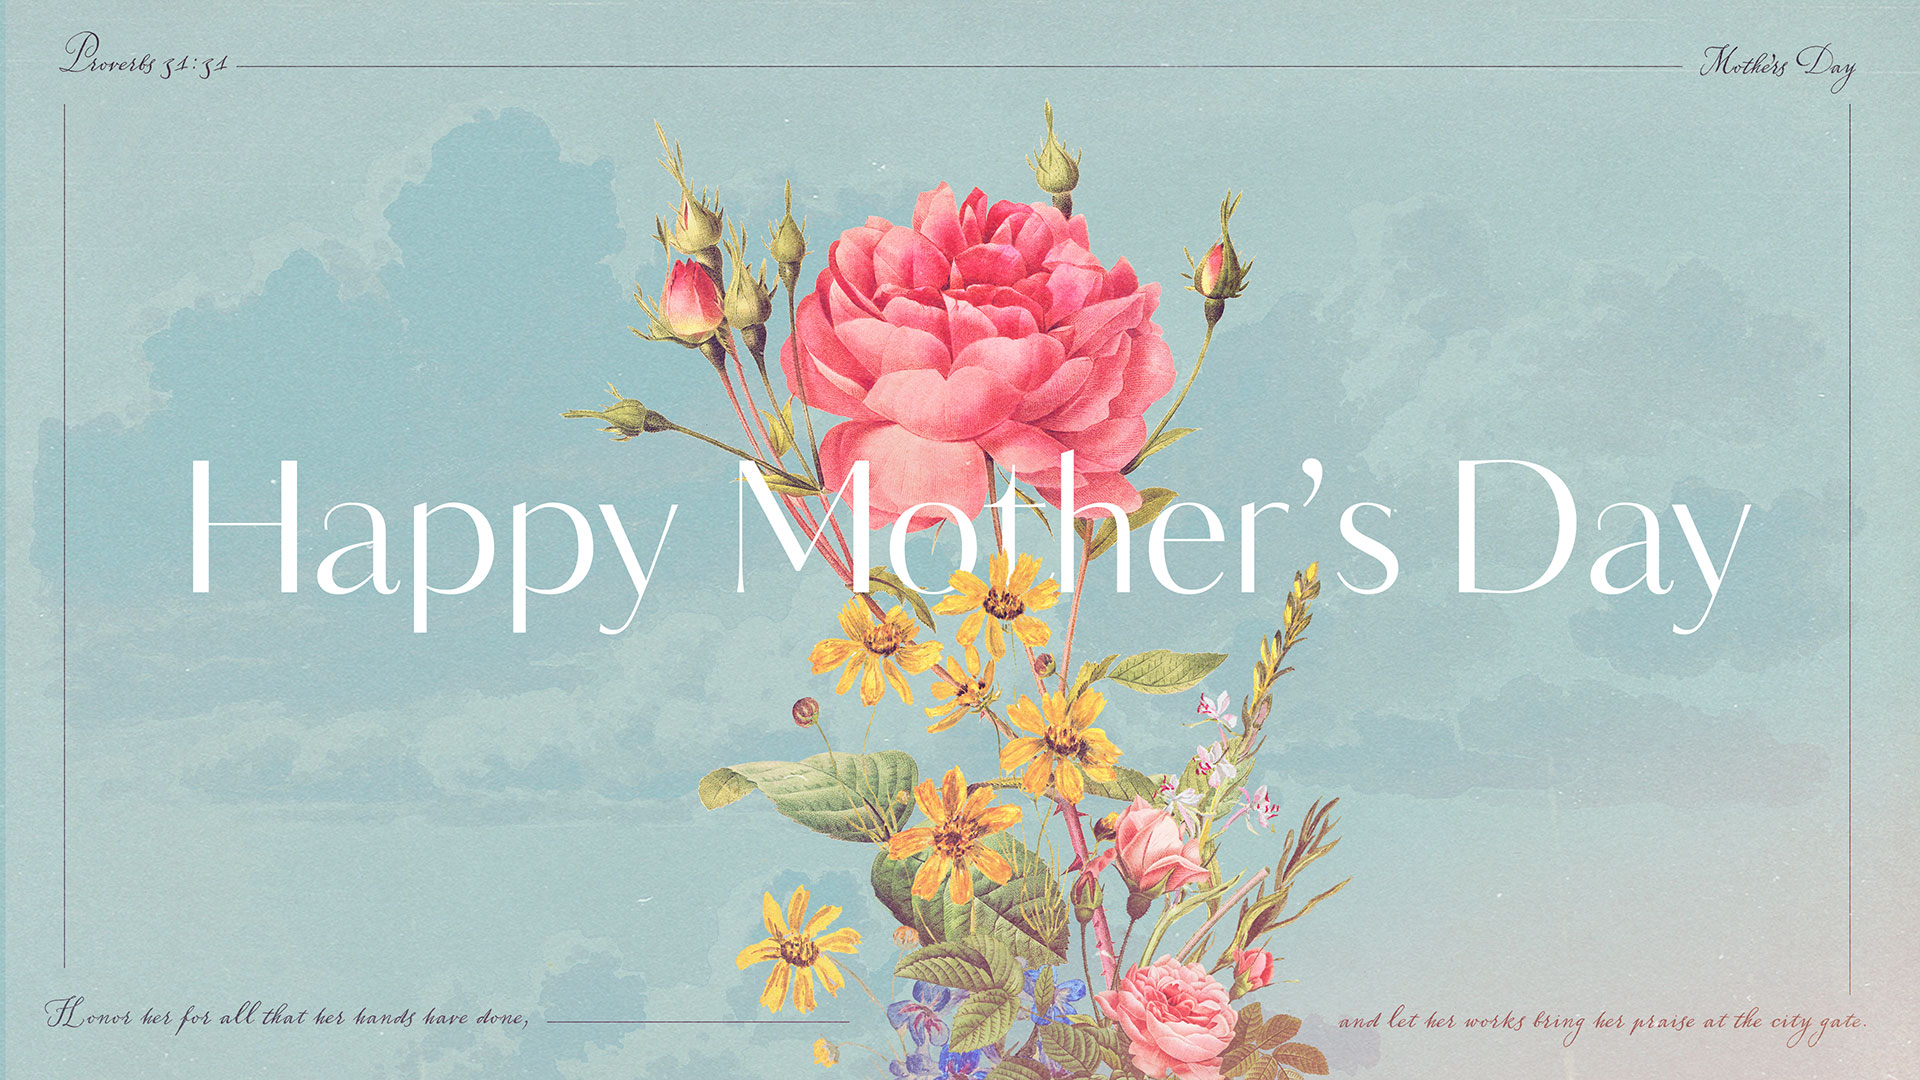 Series: Mother's Day 2019